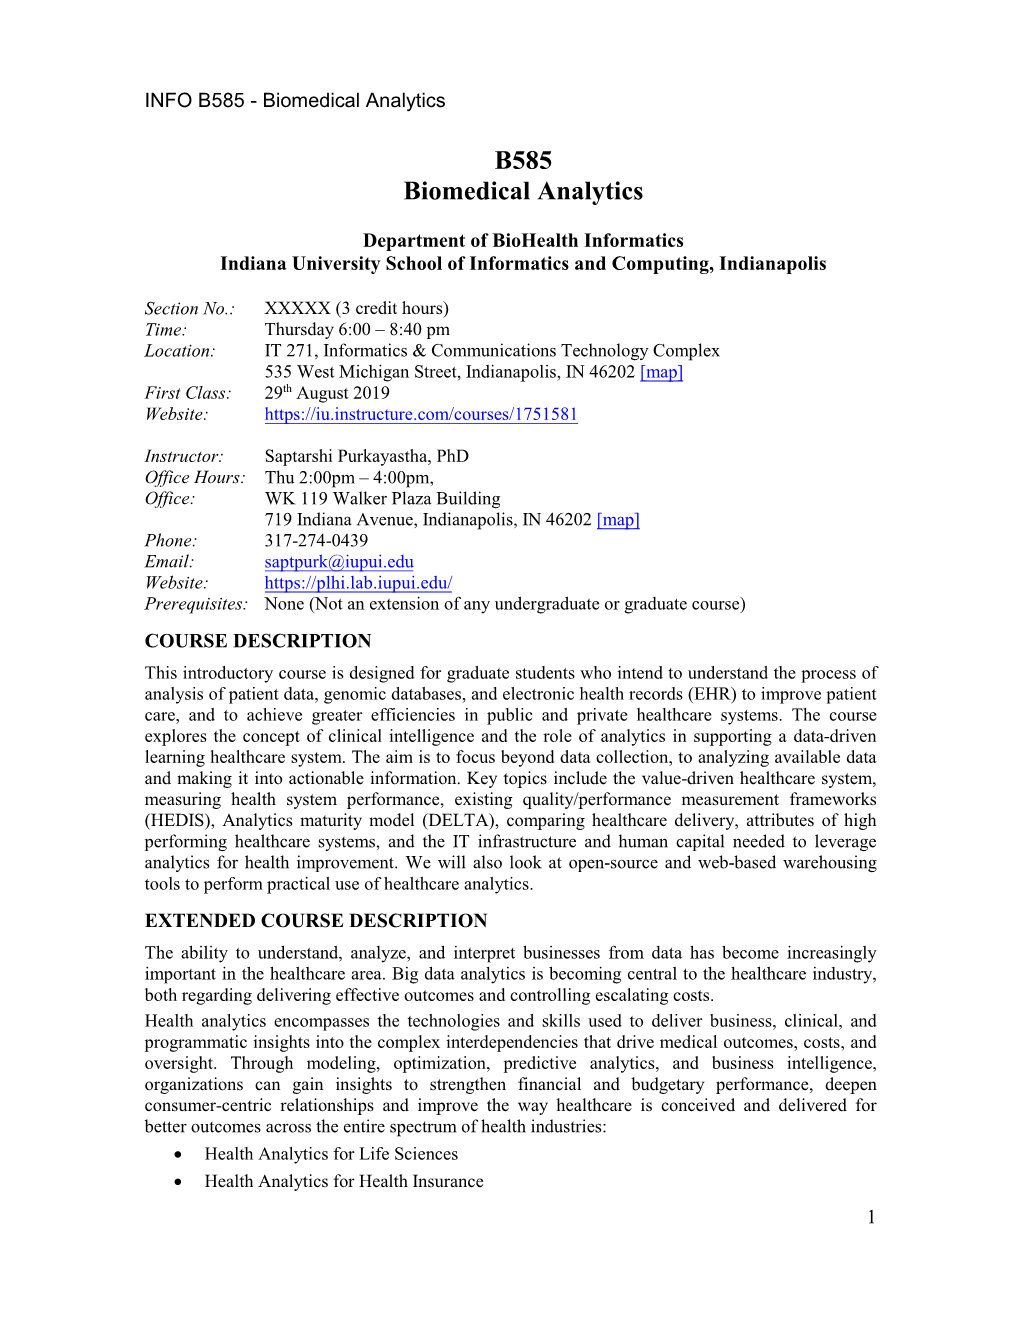 Syllabus for Health Analytics Course Fall 2014